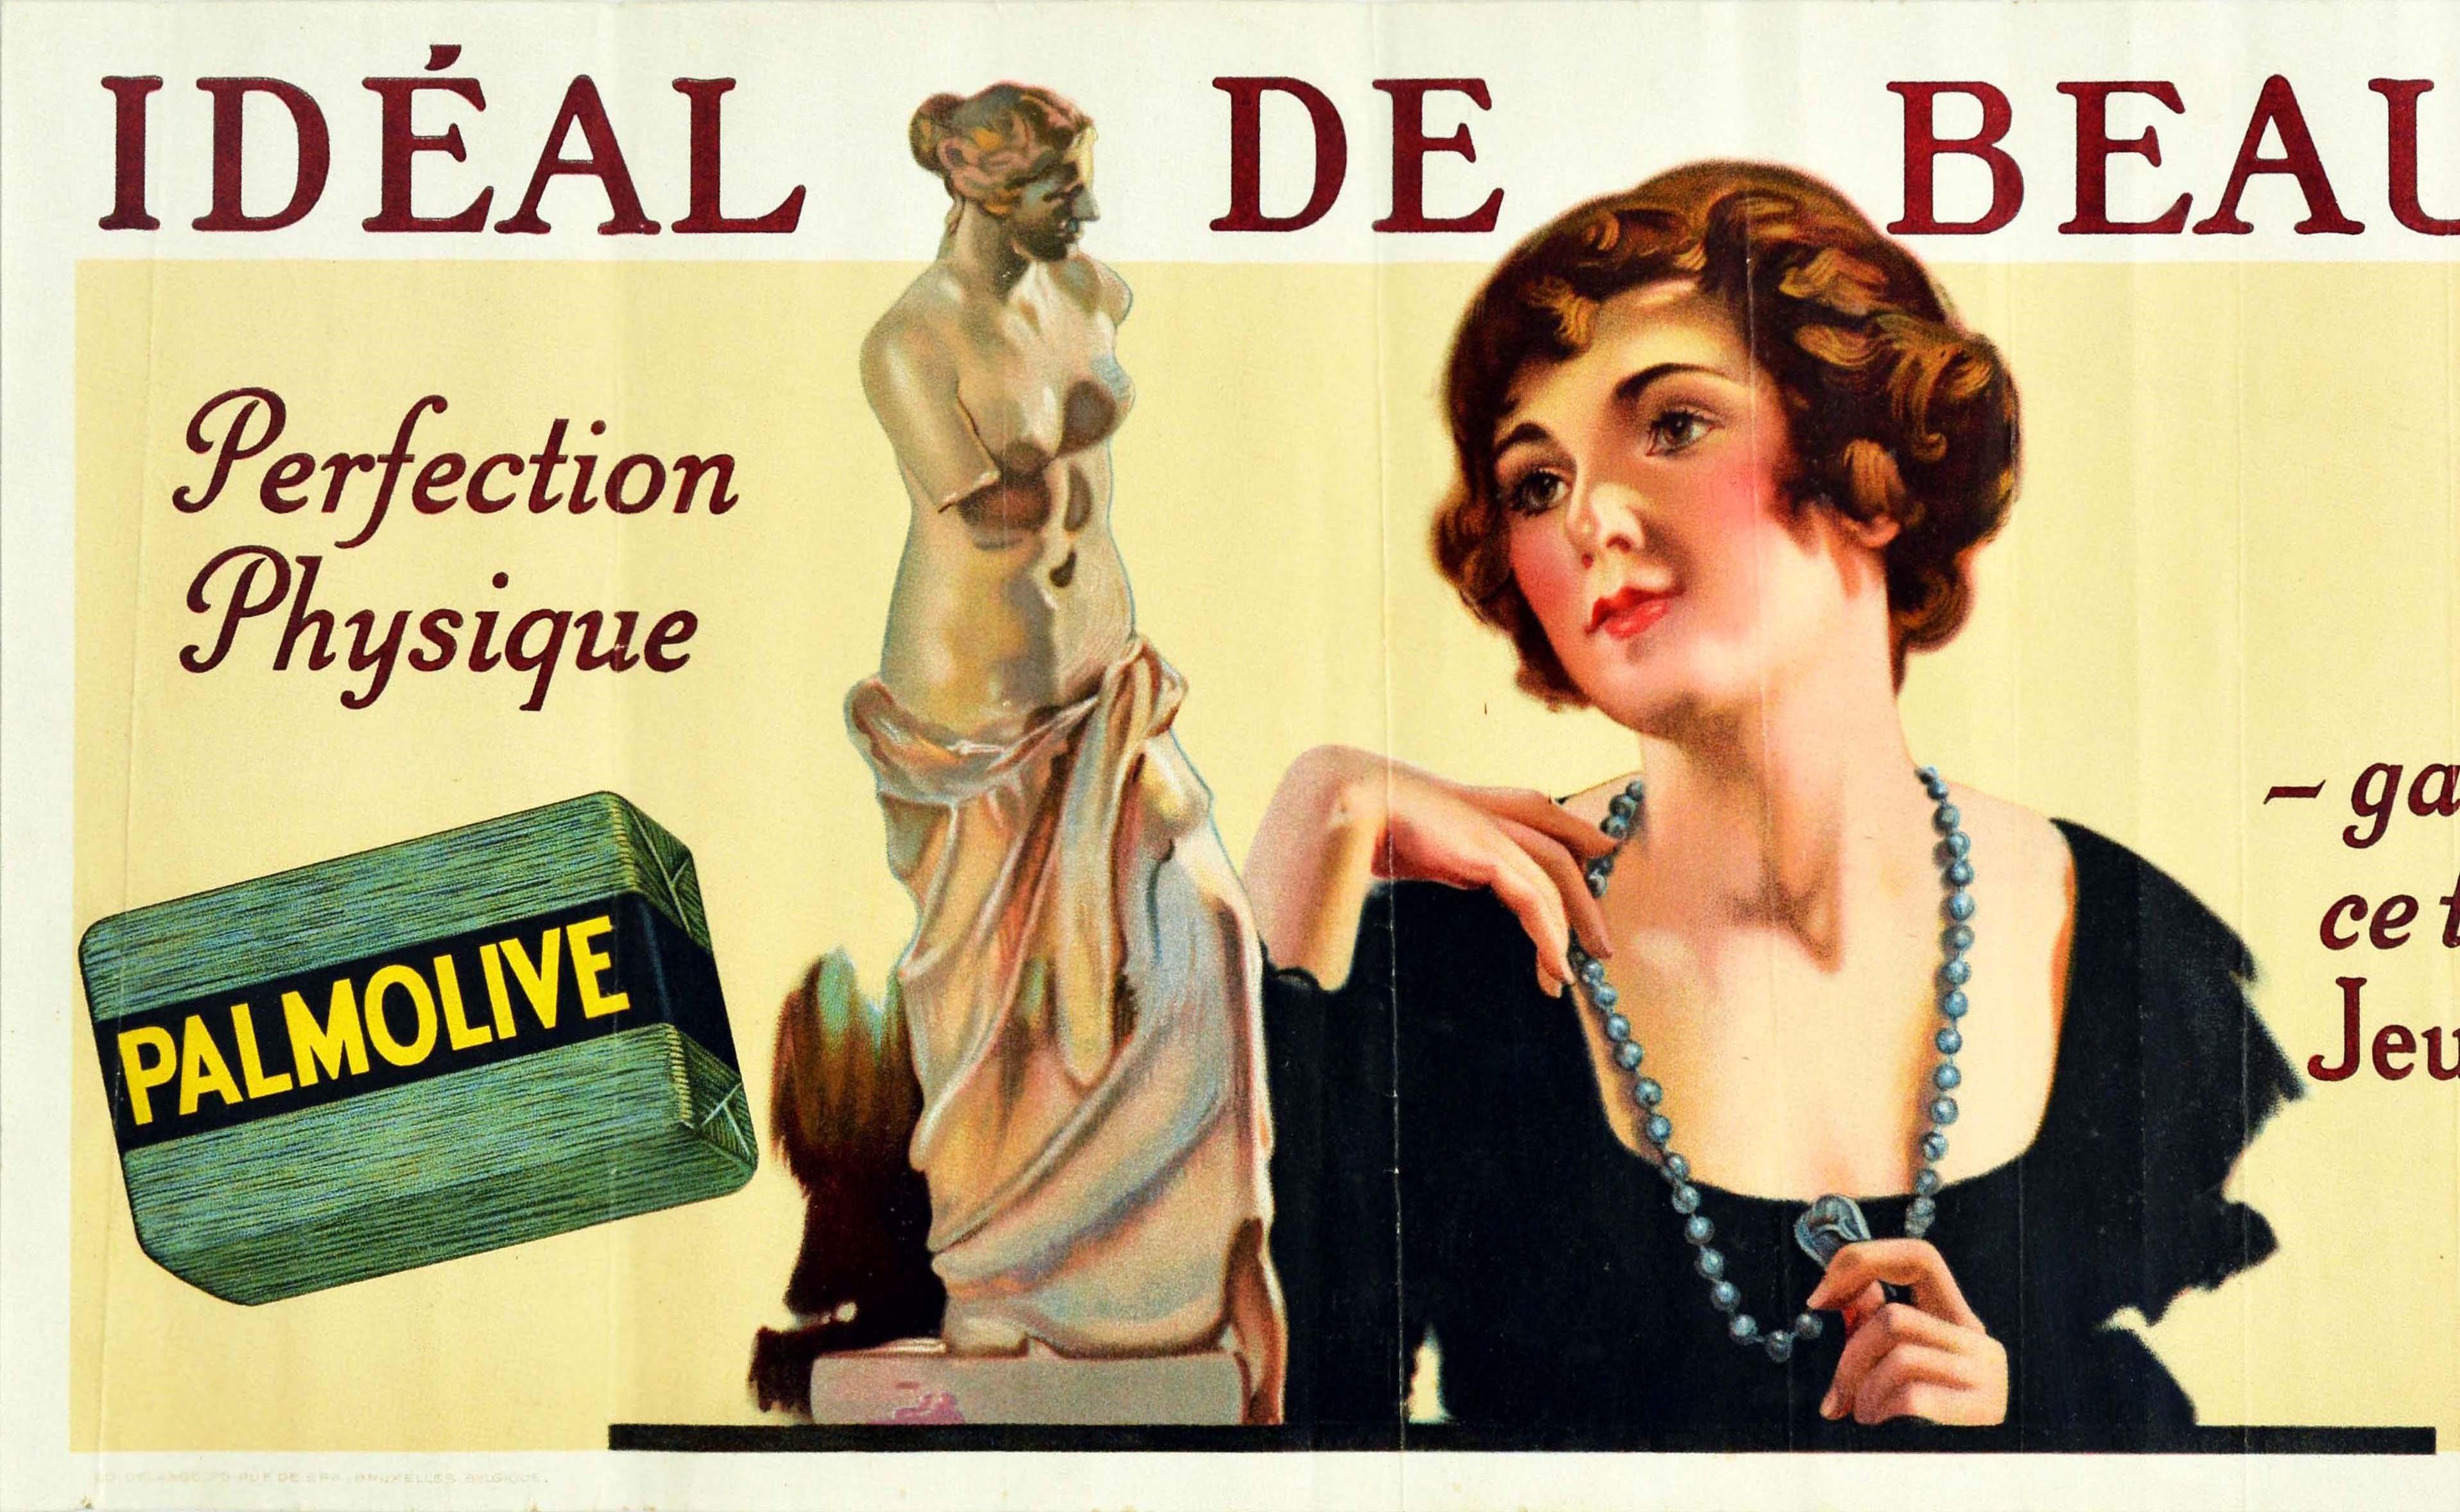 Original vintage advertising poster for Palmolive soap - Ideal de Beaute Perfection Physique gardez ce teint de Jeune Fille / Ideal beauty Physical perfection Maintain the complexion of a young girl - featuring a pretty young lady with brown curly